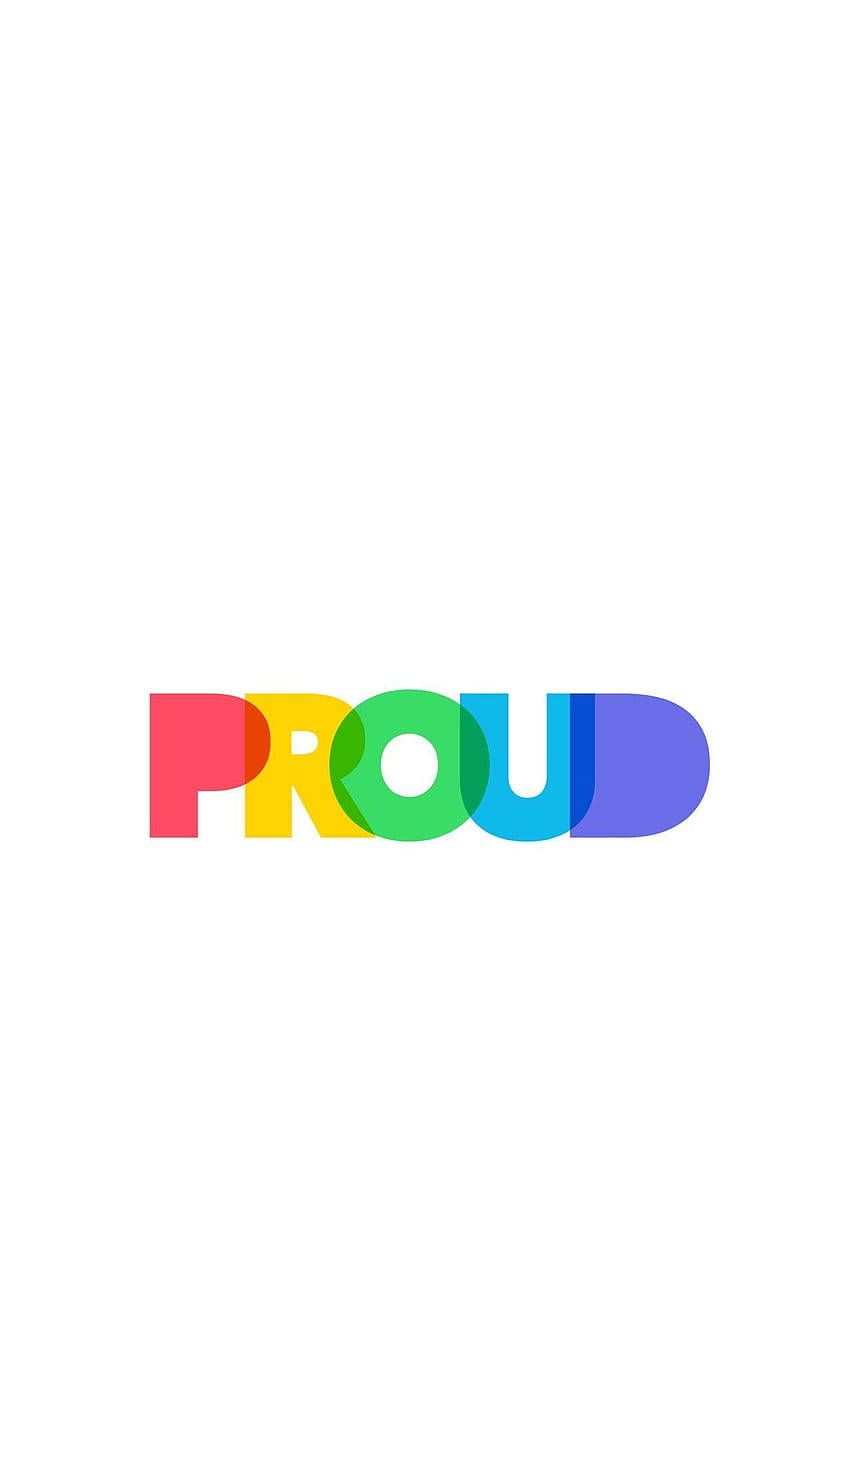 The logo for a new brand called pride - LGBT